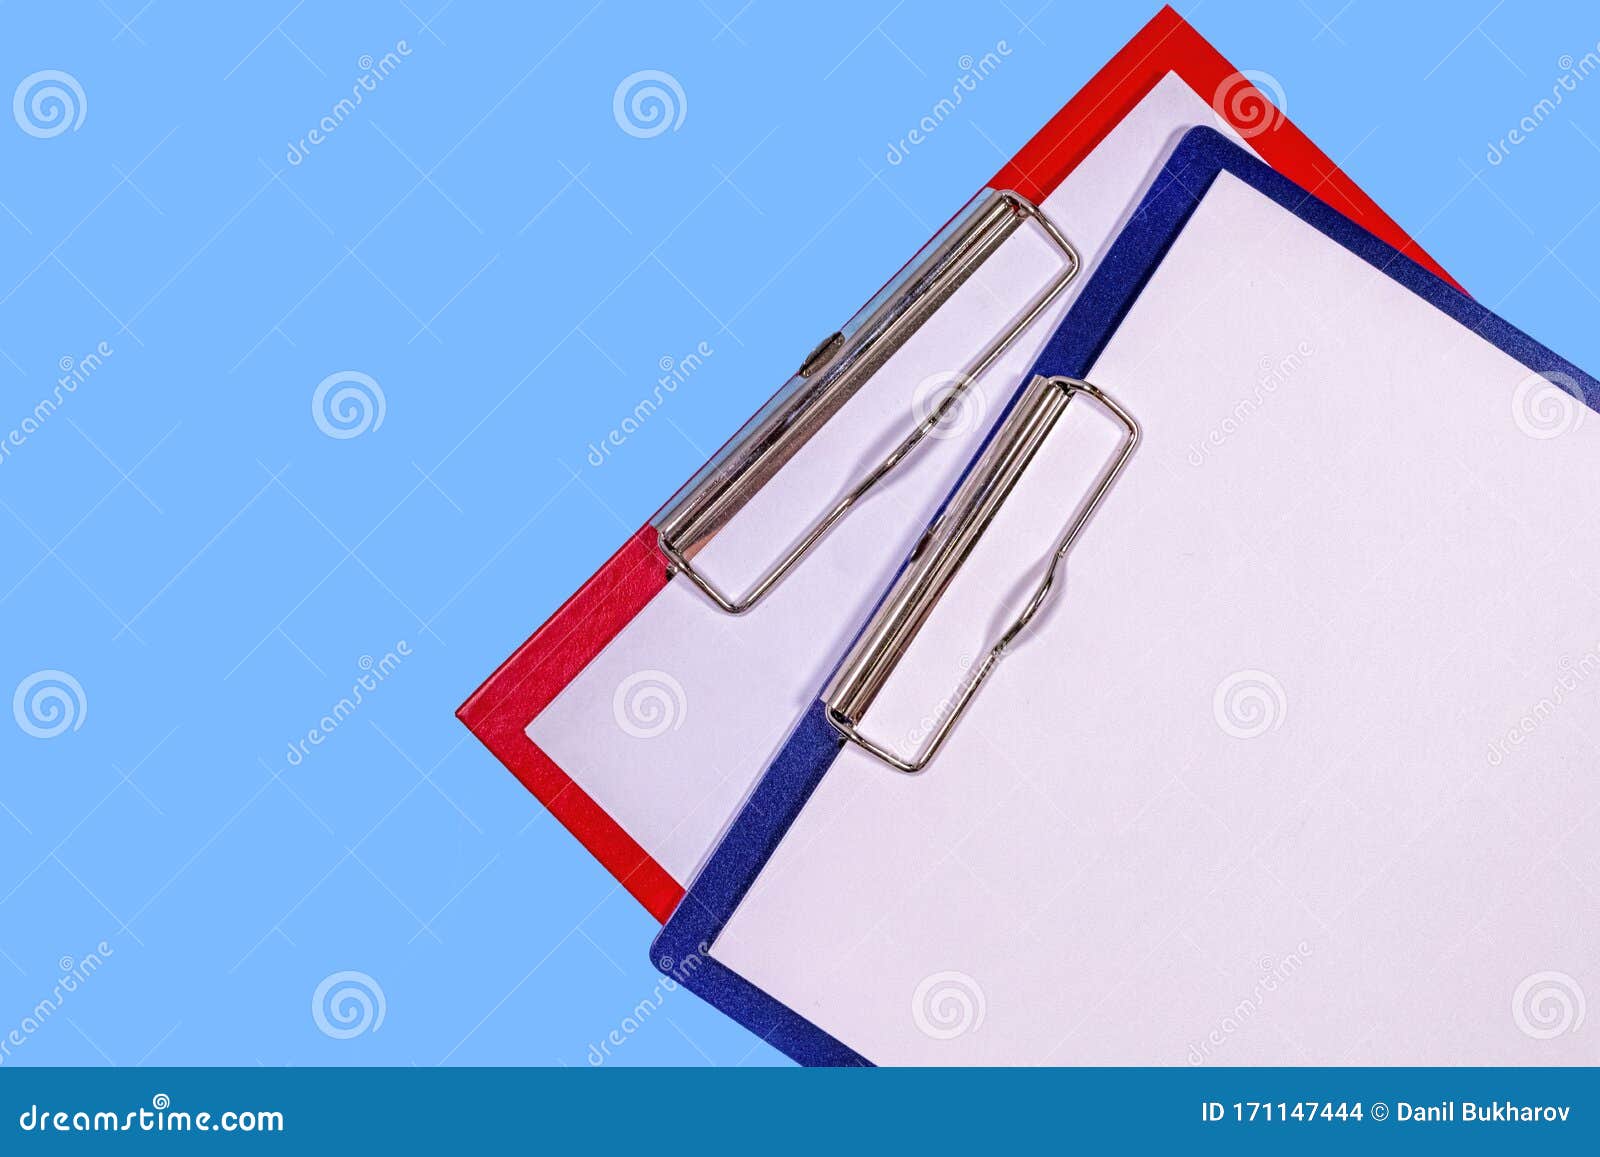 clipboards  on a simple blue background